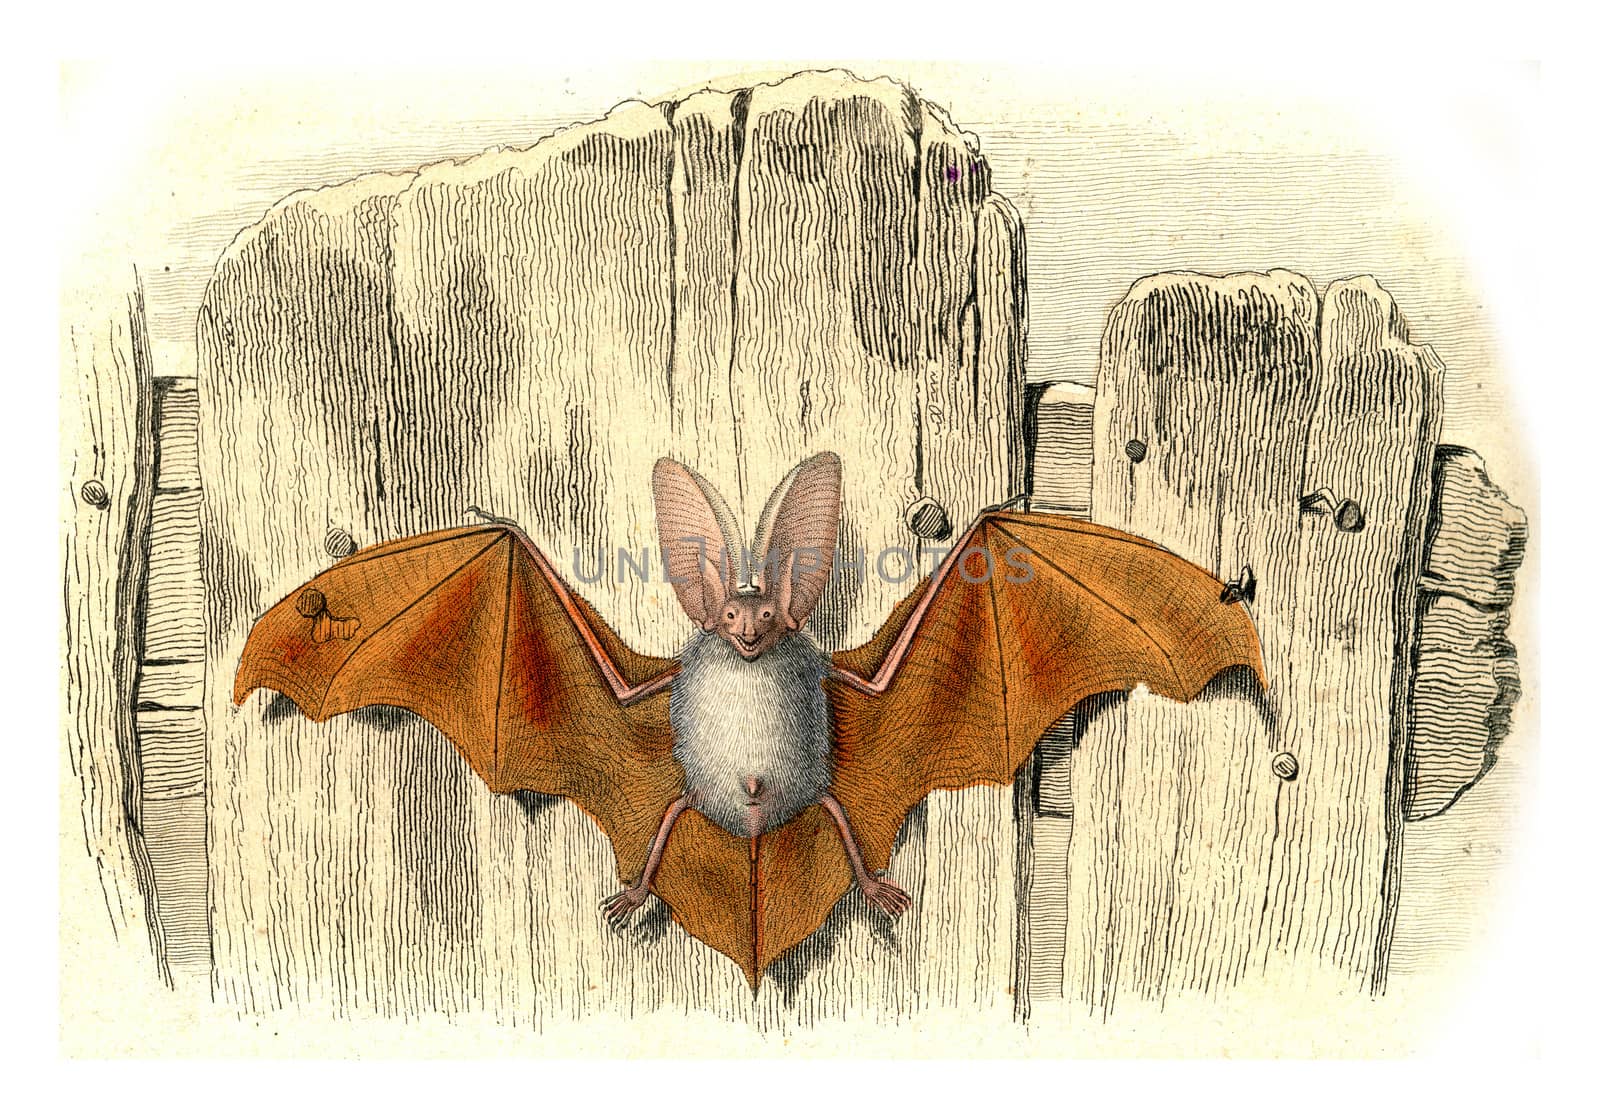 The eared bat, vintage engraving. by Morphart